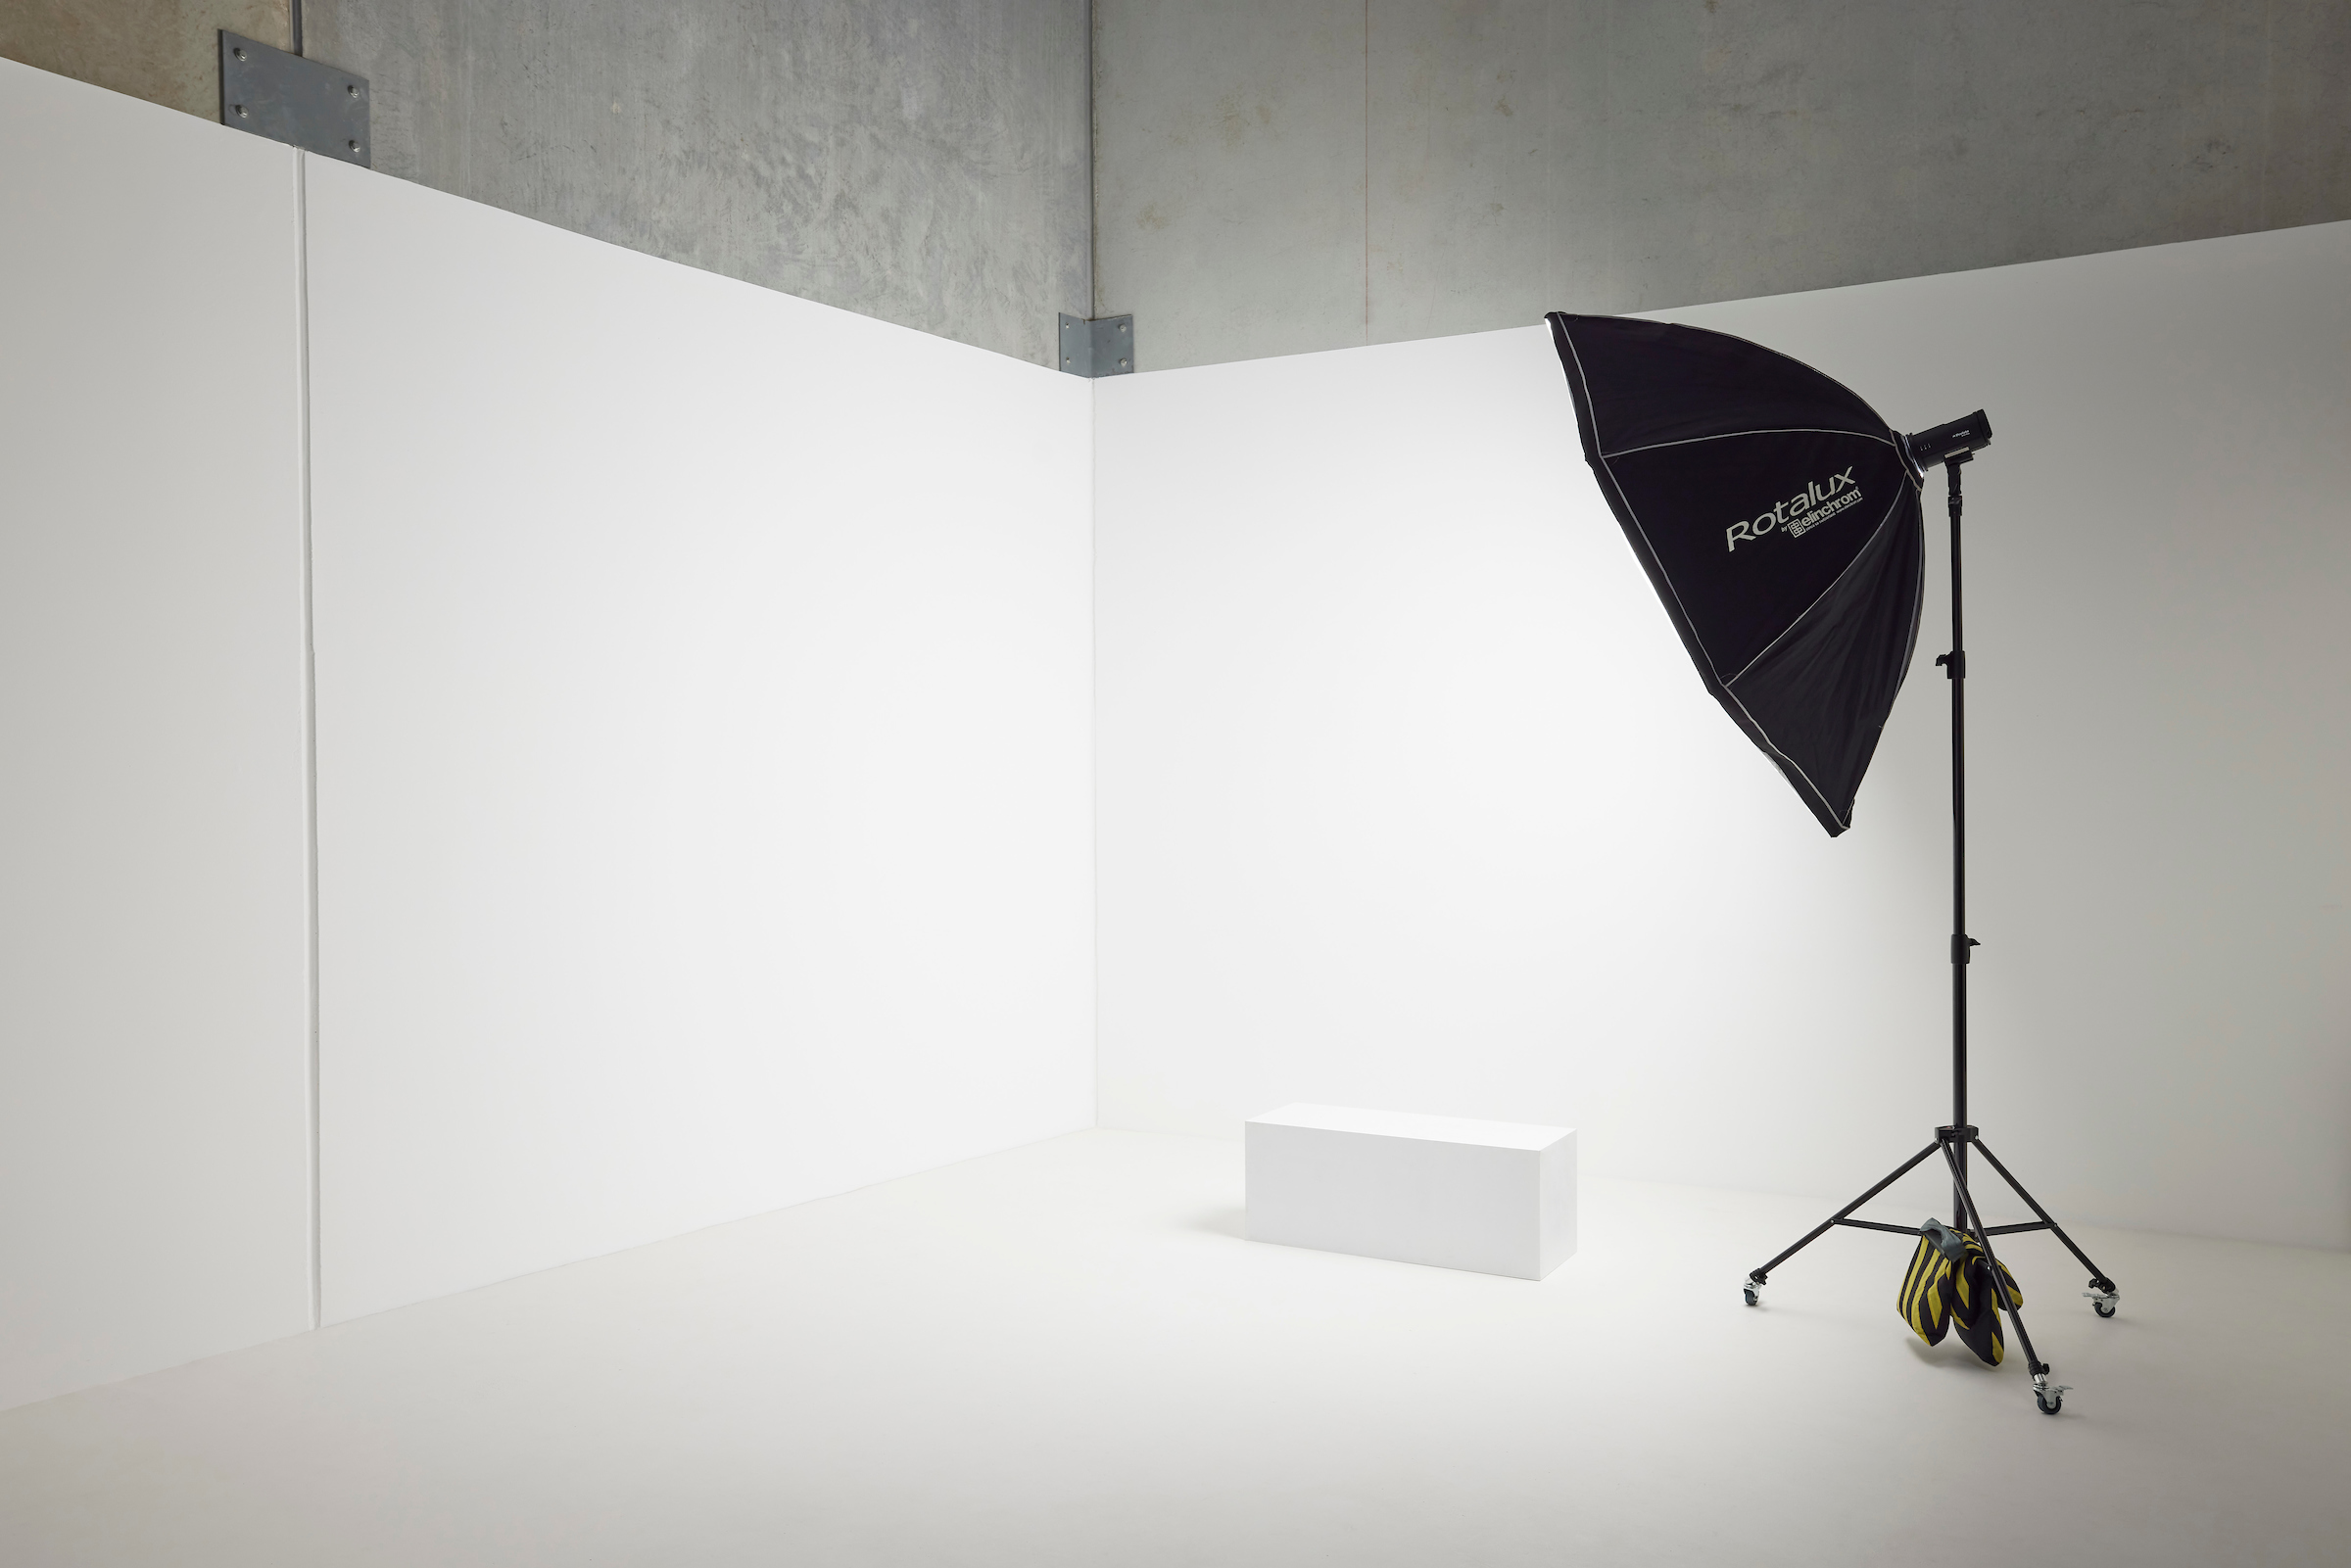 Large Studio space with white walls and black light box